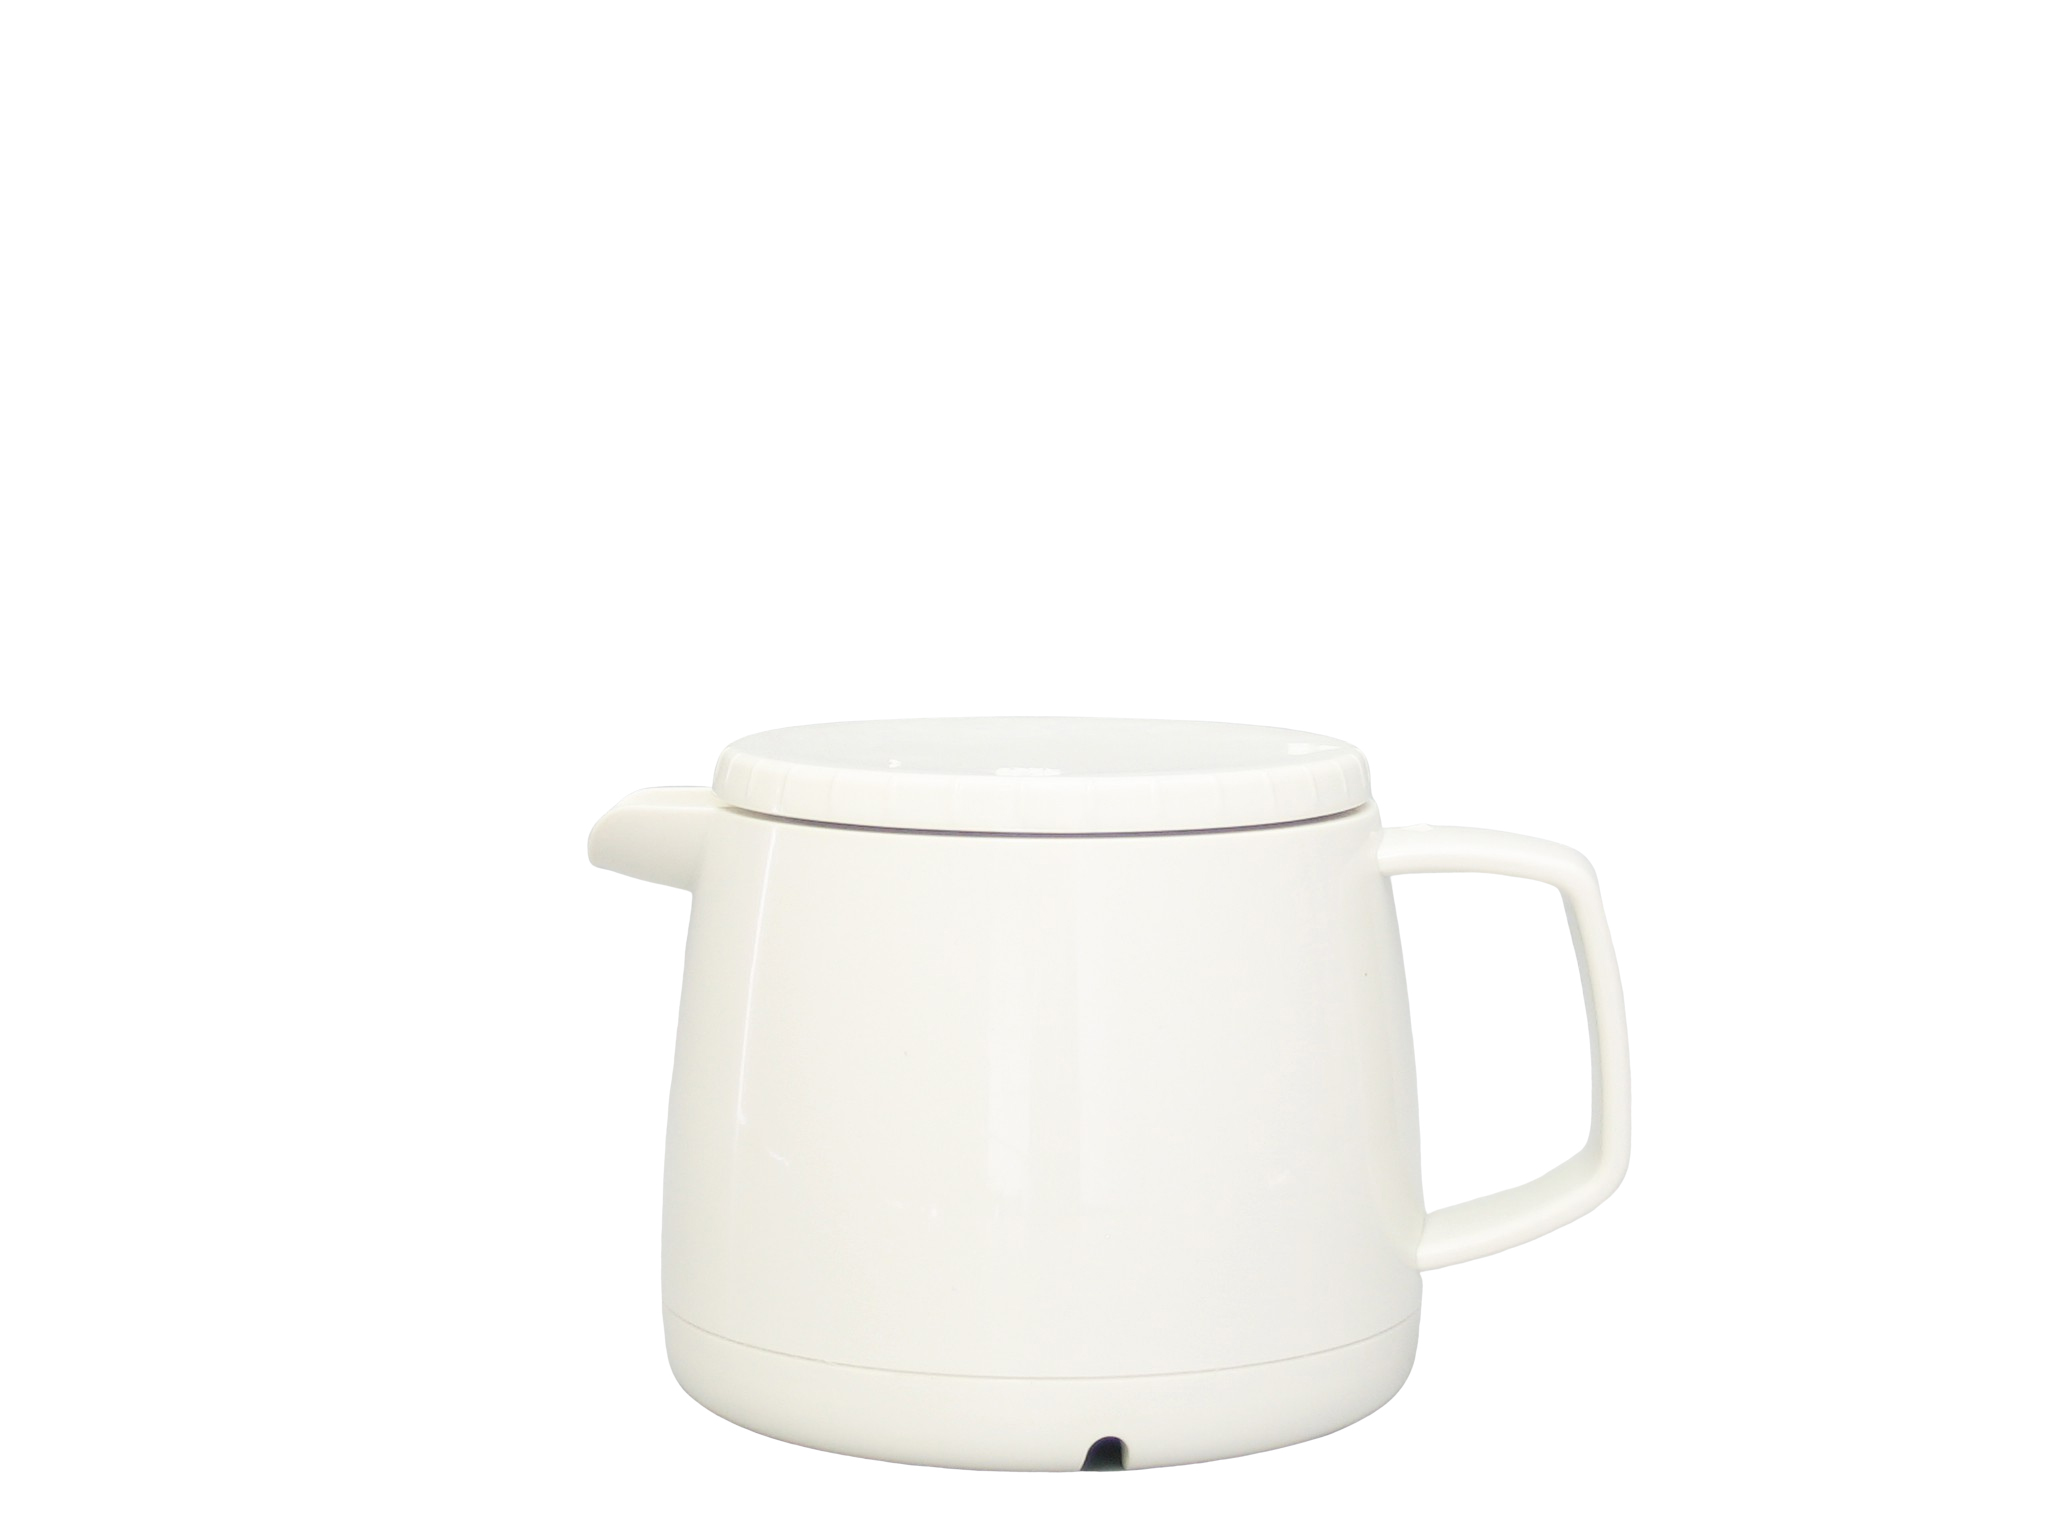 JAZZ030S-001 - Insulated carafe low height SS white 0.30 L - Isobel